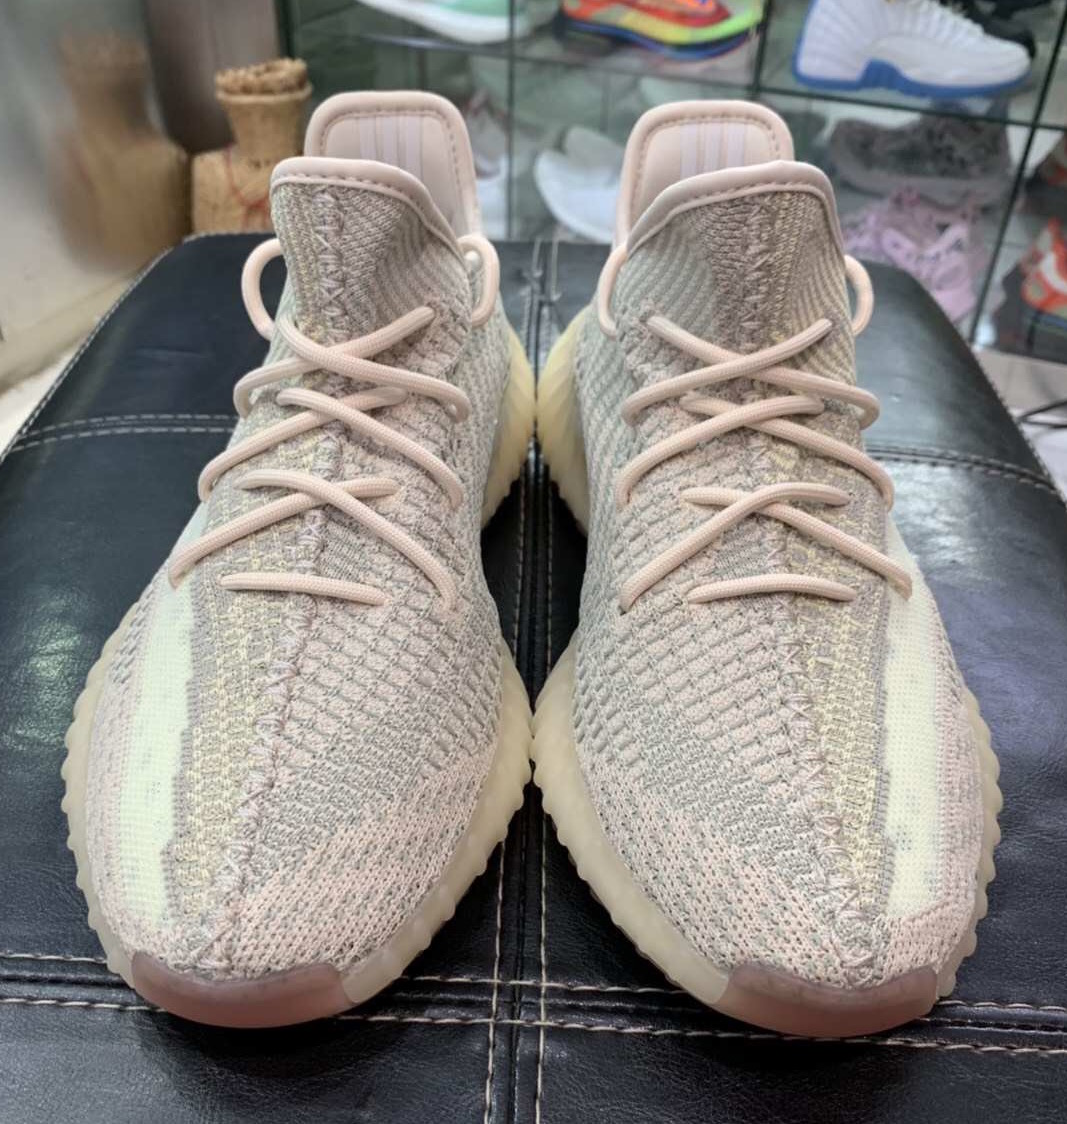 Adidas Yeezy Boost 350 V2 Cloud White Reflective FW5317